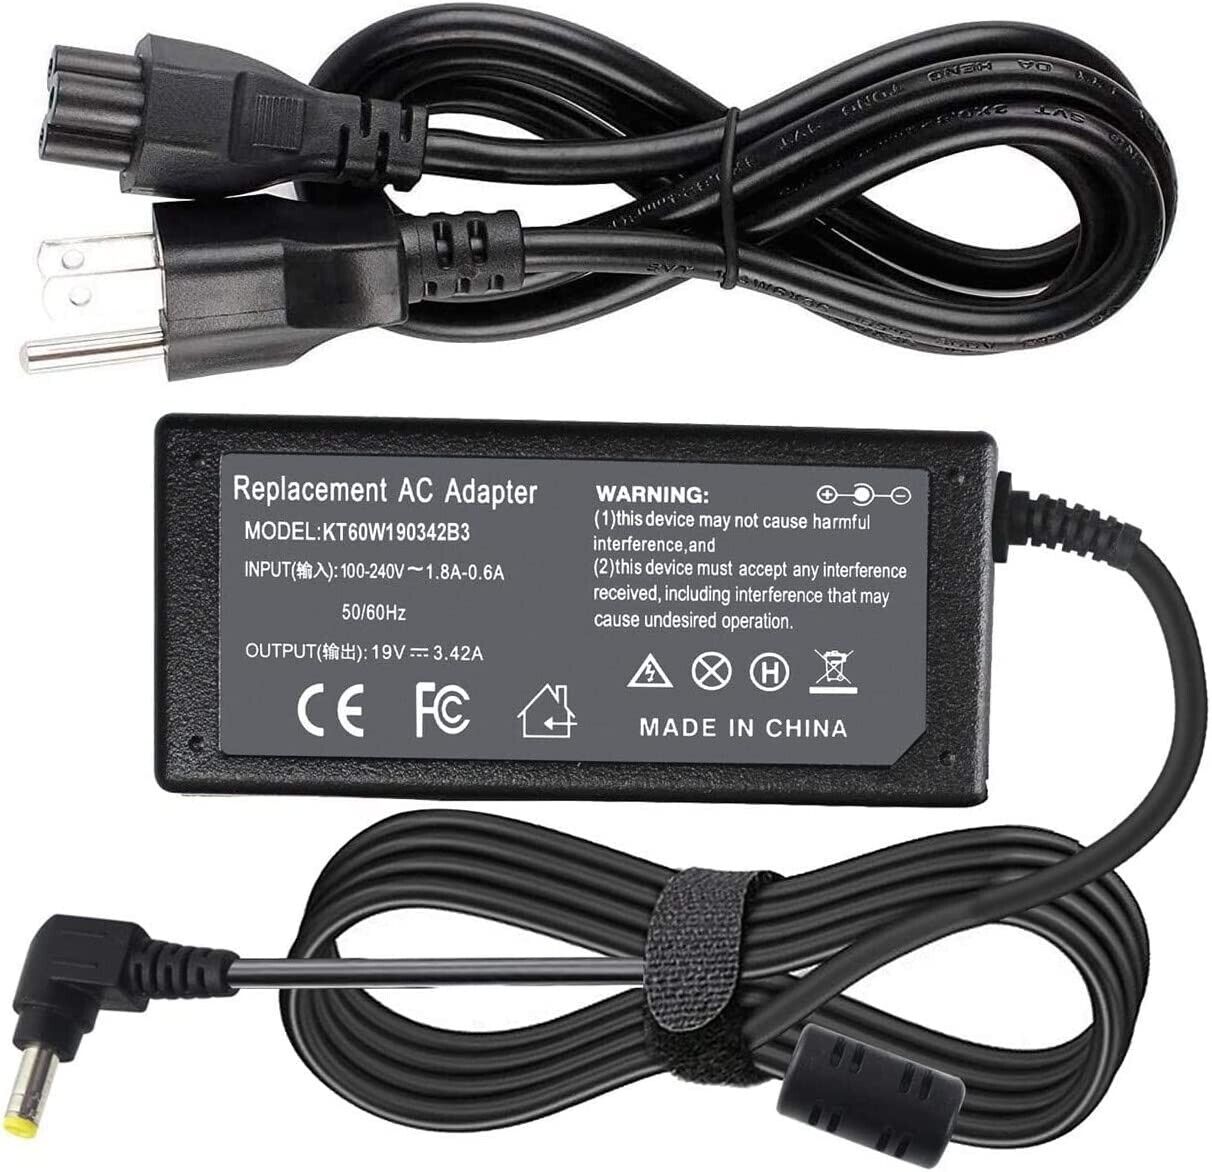 AC Adapter Charger For Toshiba Satellite C50-BST2NX3, BC55Dt-A5106, C50-BST2NX6 